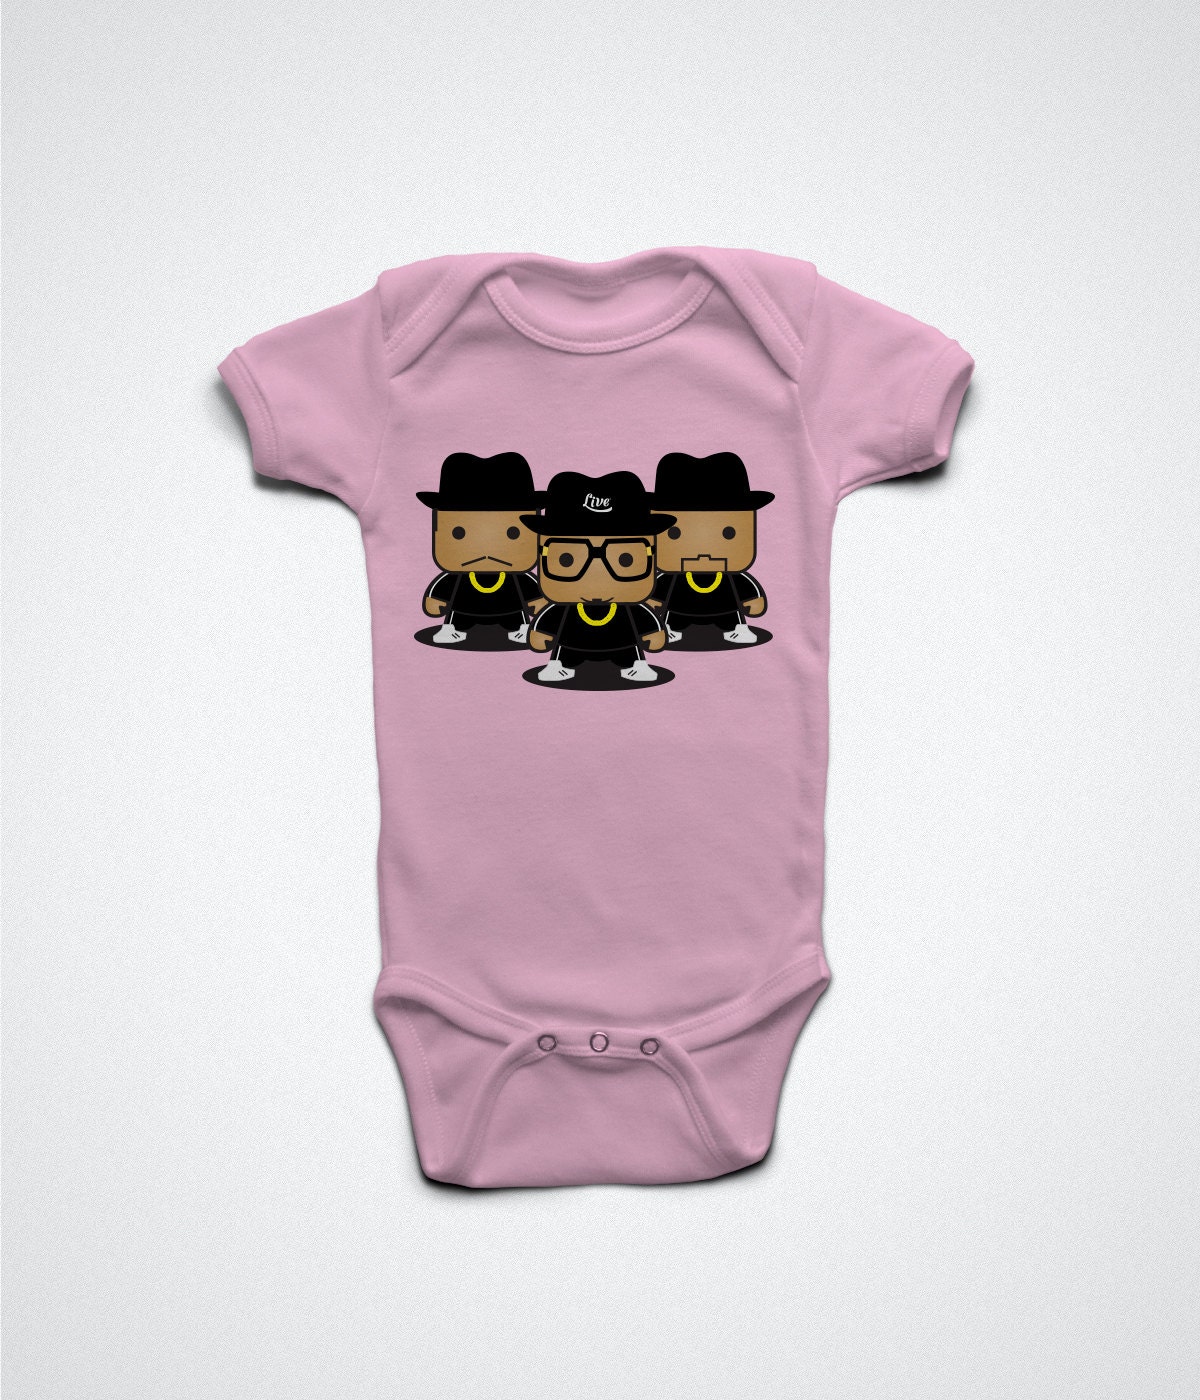 It's Tricky Rappers  - Old school, rapper and hip-hop character baby infant bodysuits